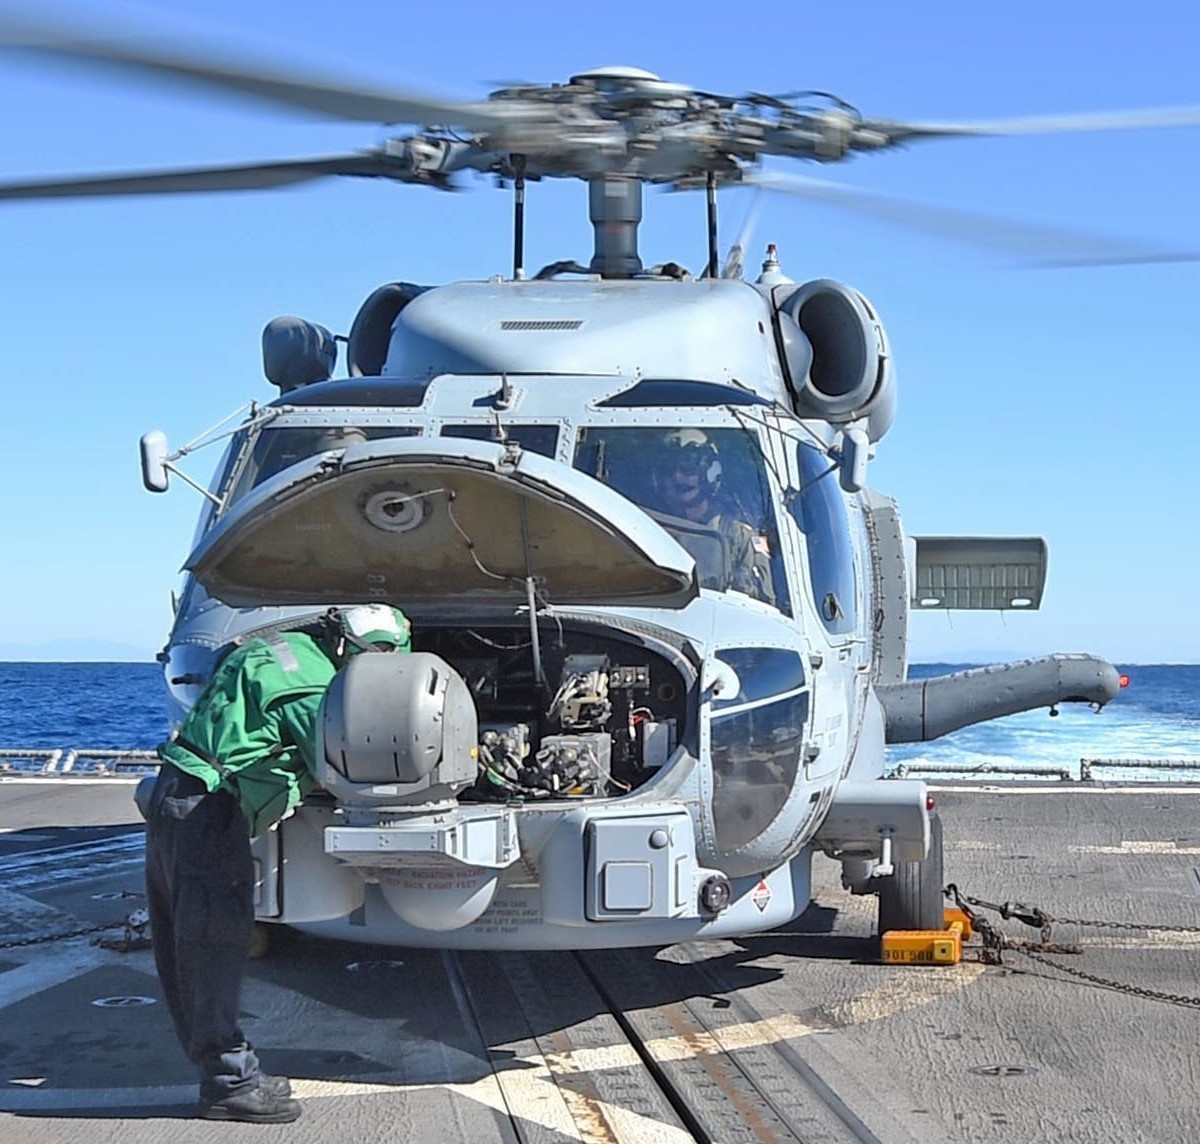 hsm-71 raptors helicopter maritime strike squadron mh-60r seahawk navy 2015 69